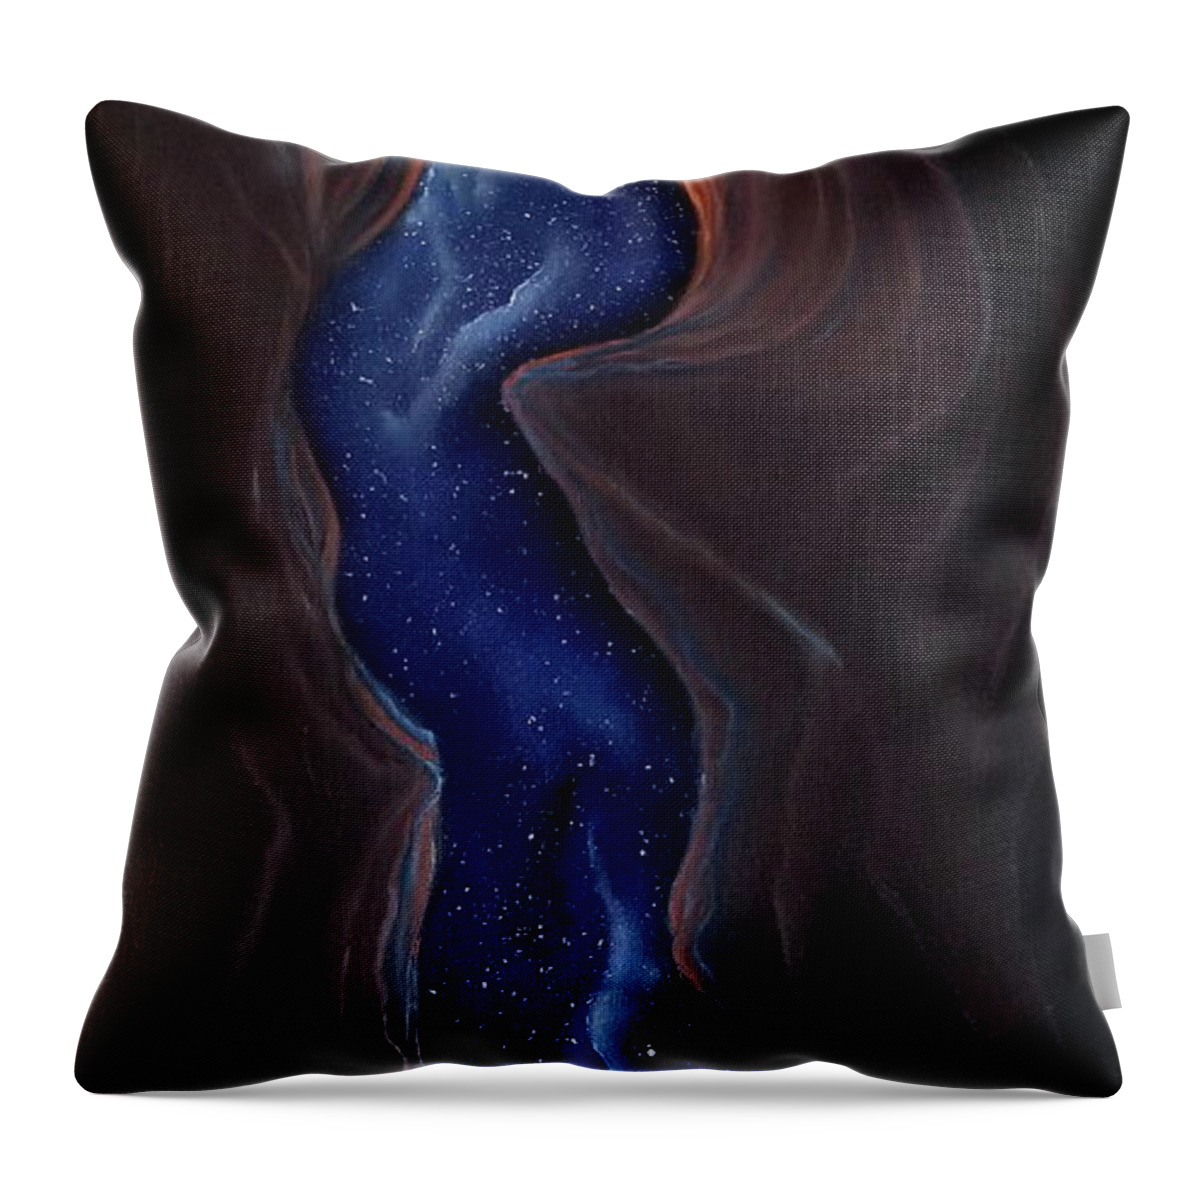 Slot Canyon Throw Pillow featuring the painting Celestial River by Neslihan Ergul Colley